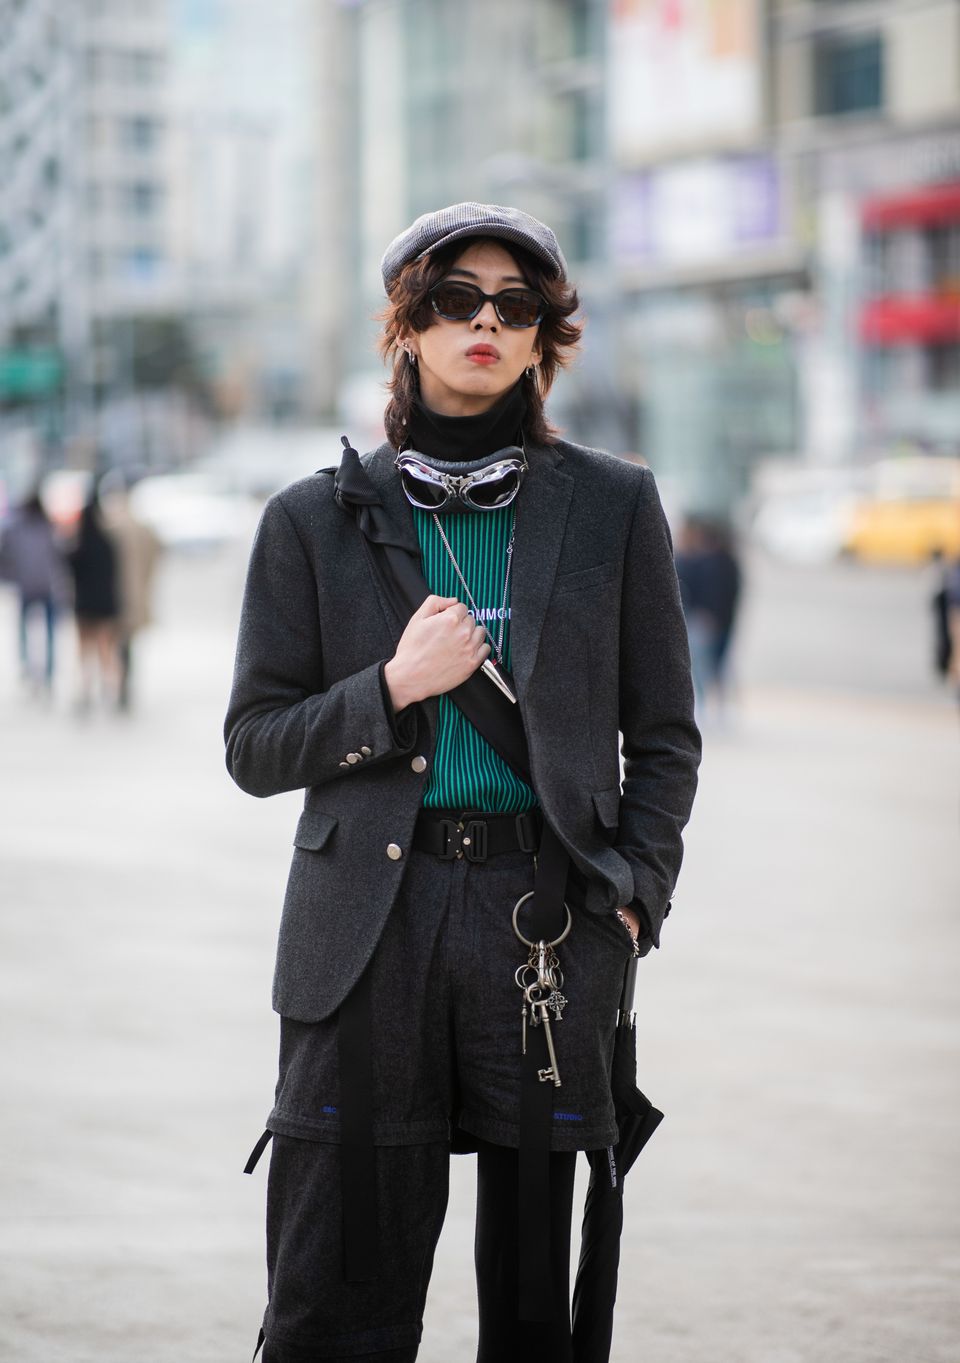 Seoul Street Style Photos Will Seriously Inspire You To Up Your Fashion ...